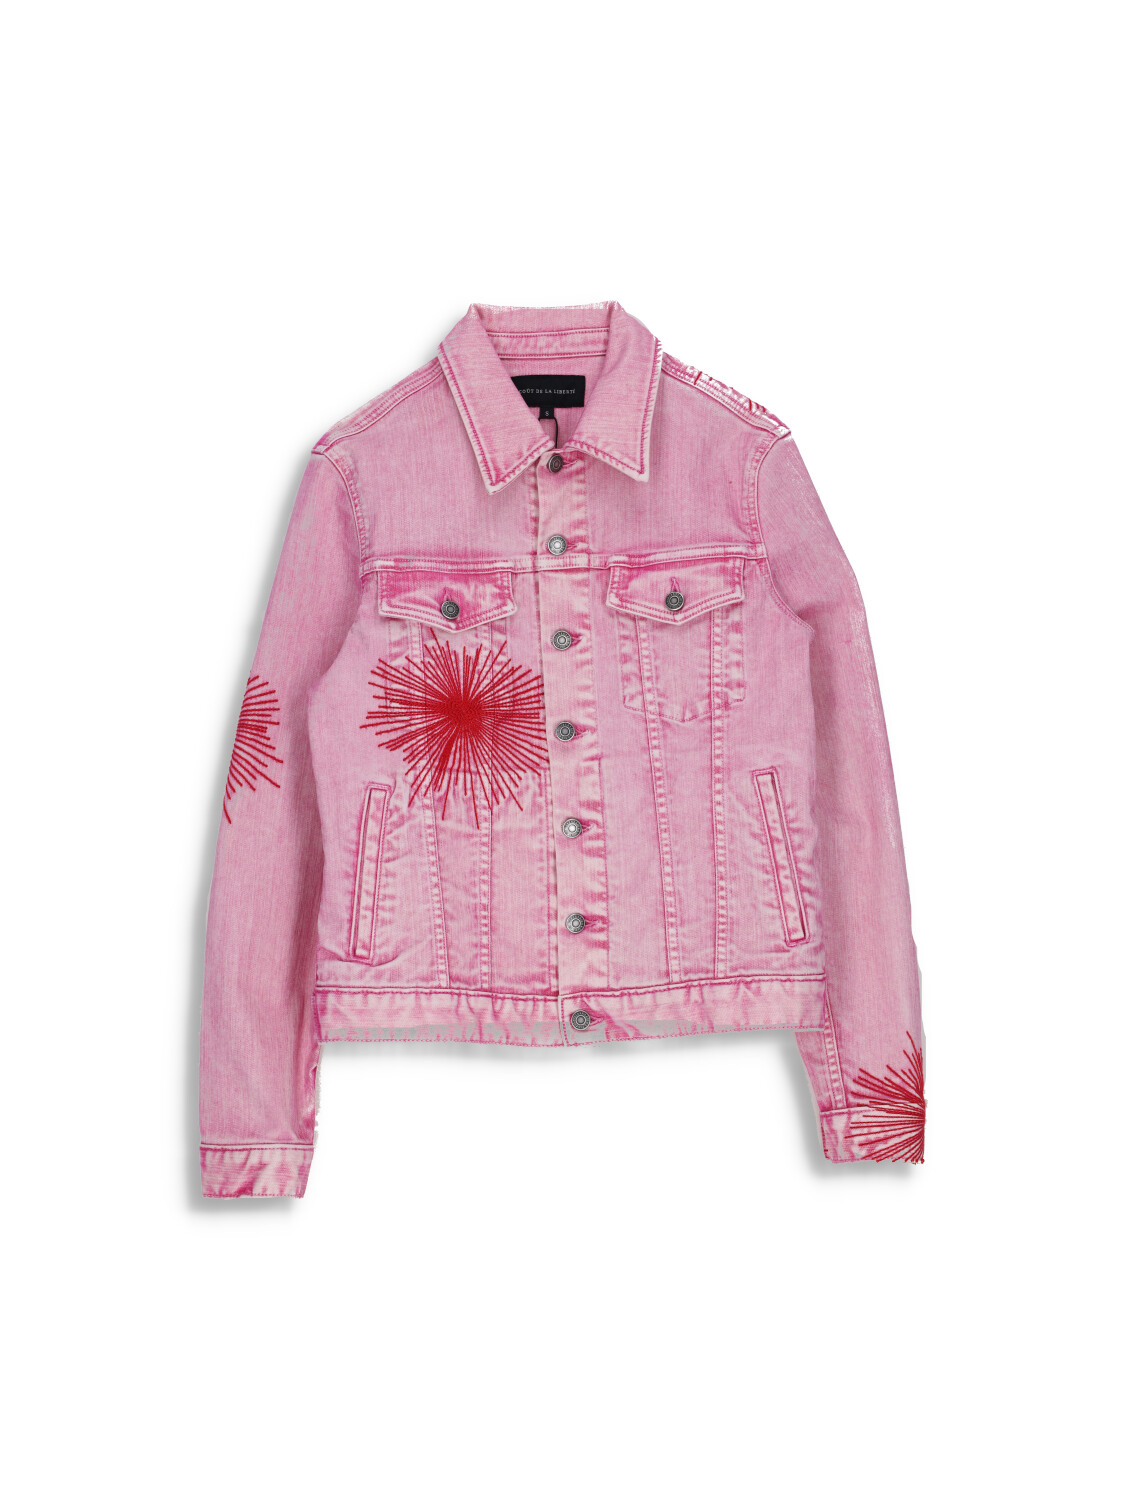 Johnny Trucker - Denim jacket with washed out look and flower embroidery